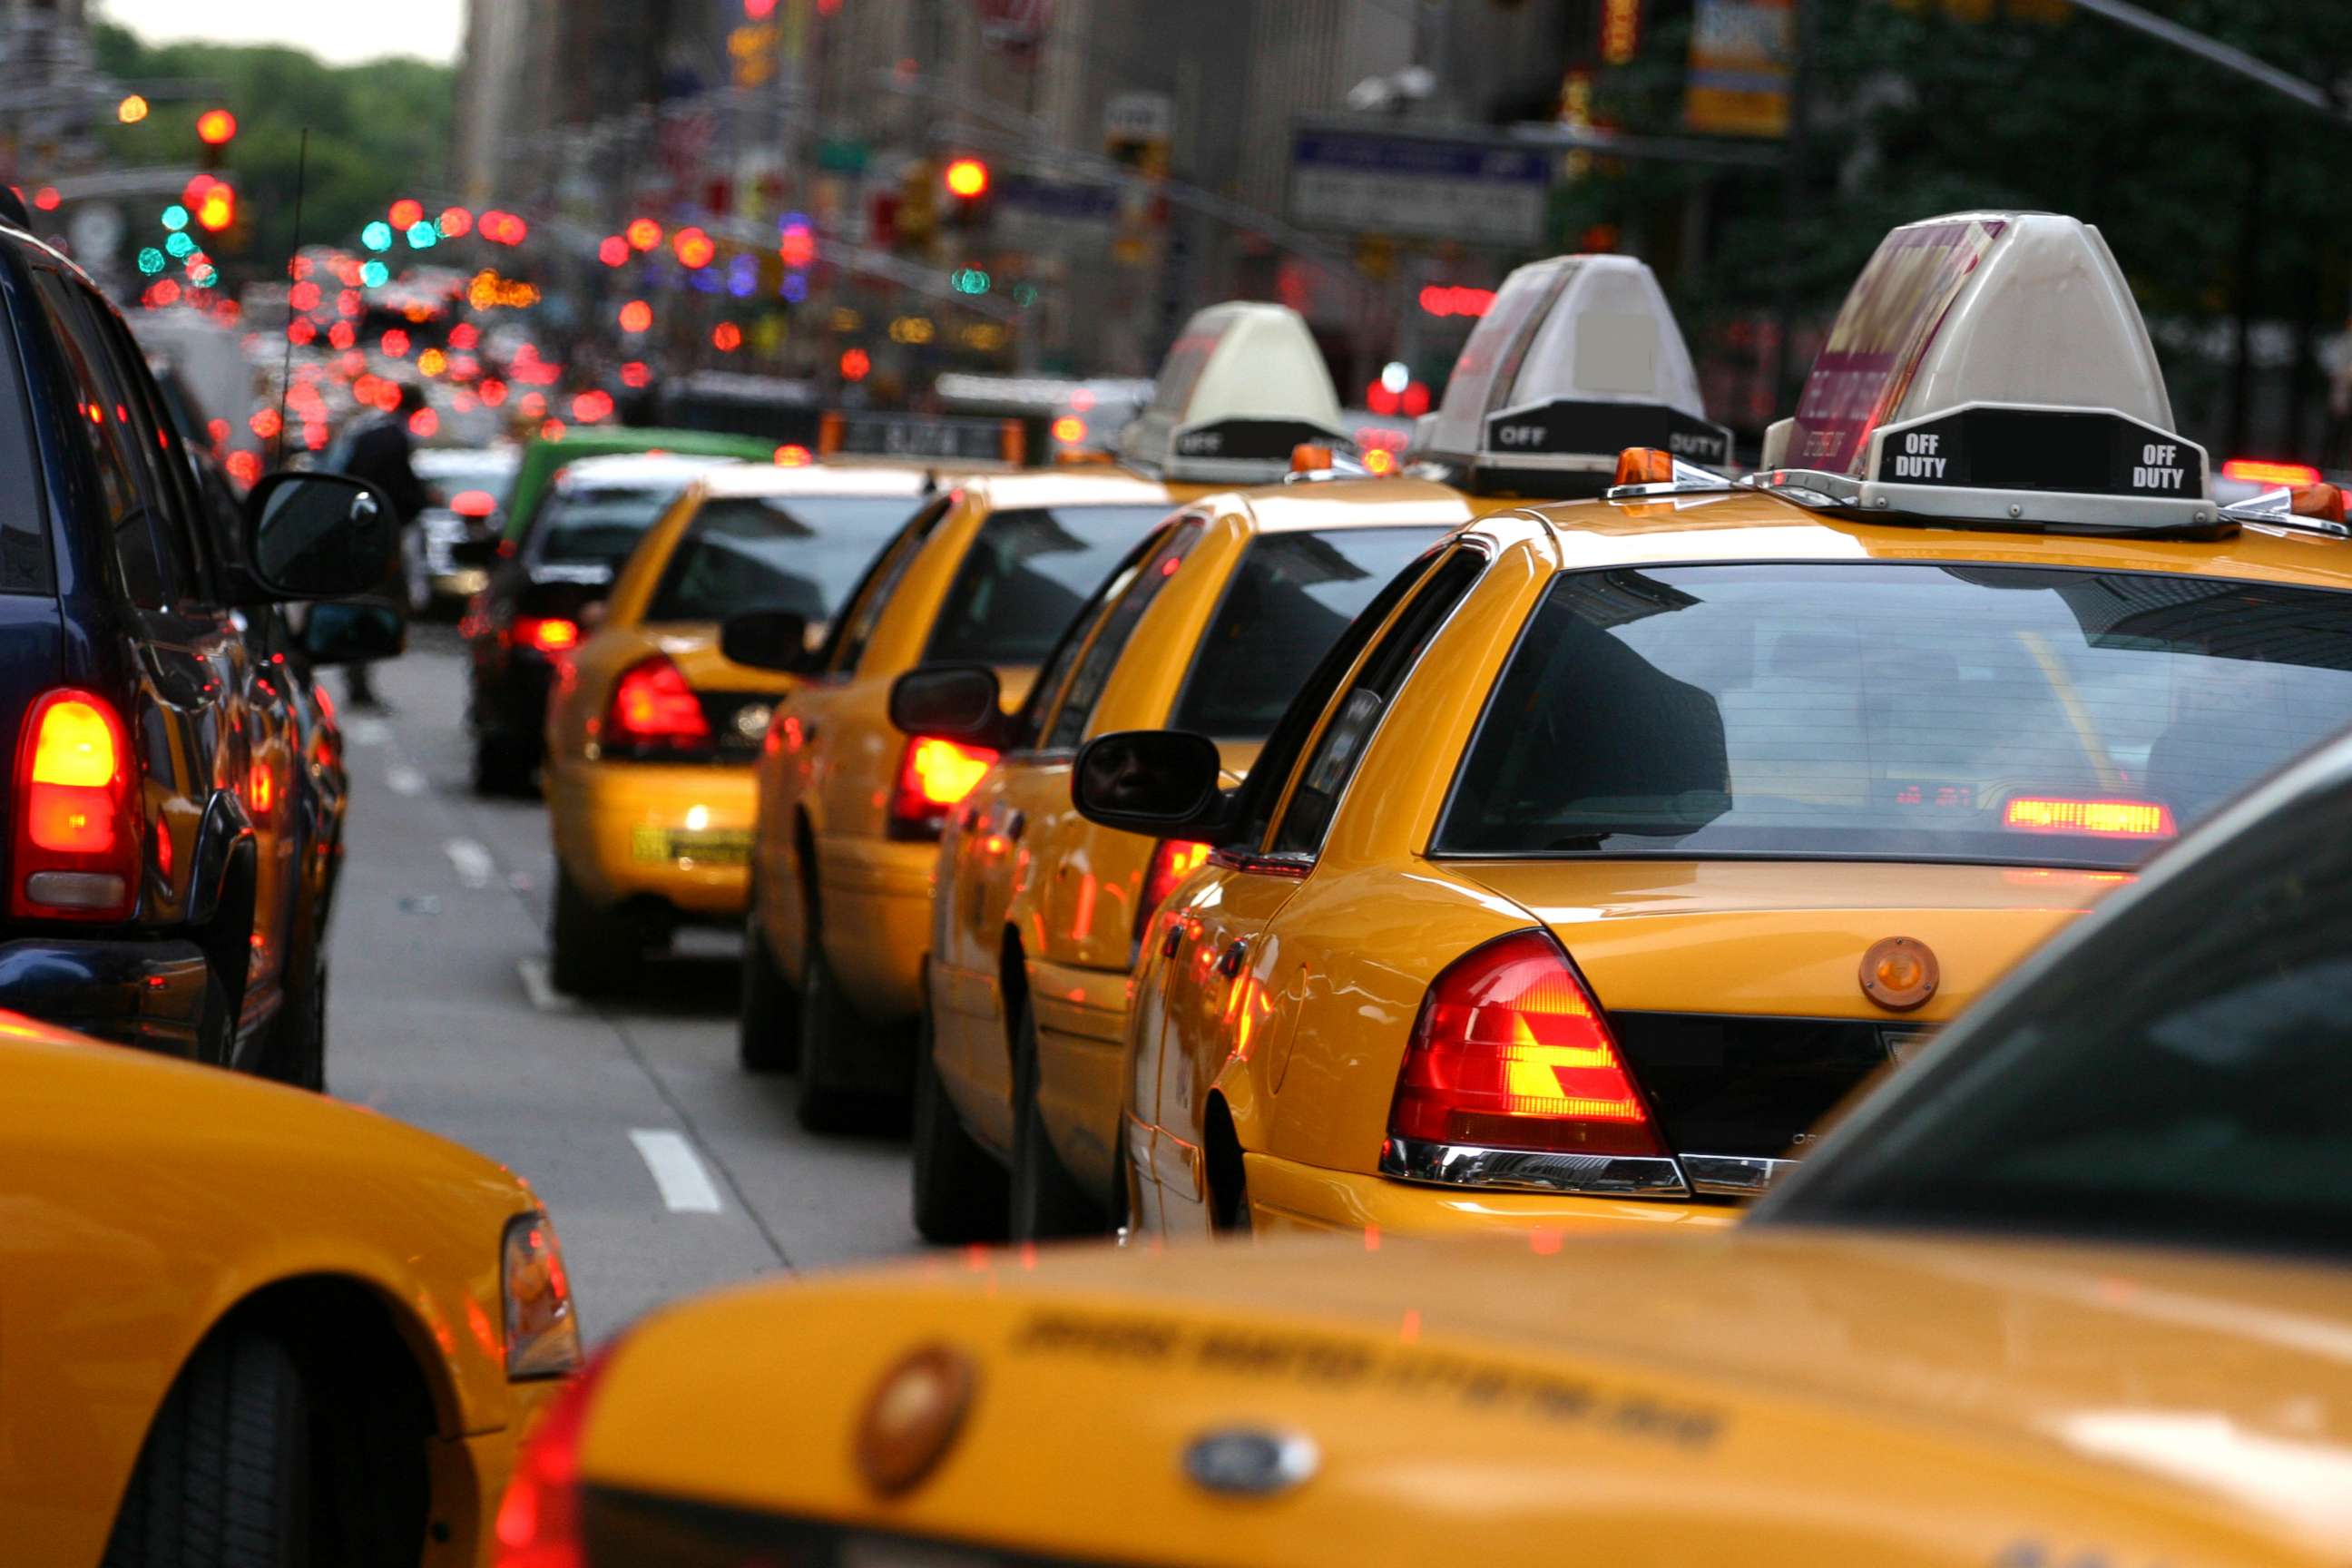 PHOTO: Taxis are seen here in NYC in this undated stock photo.